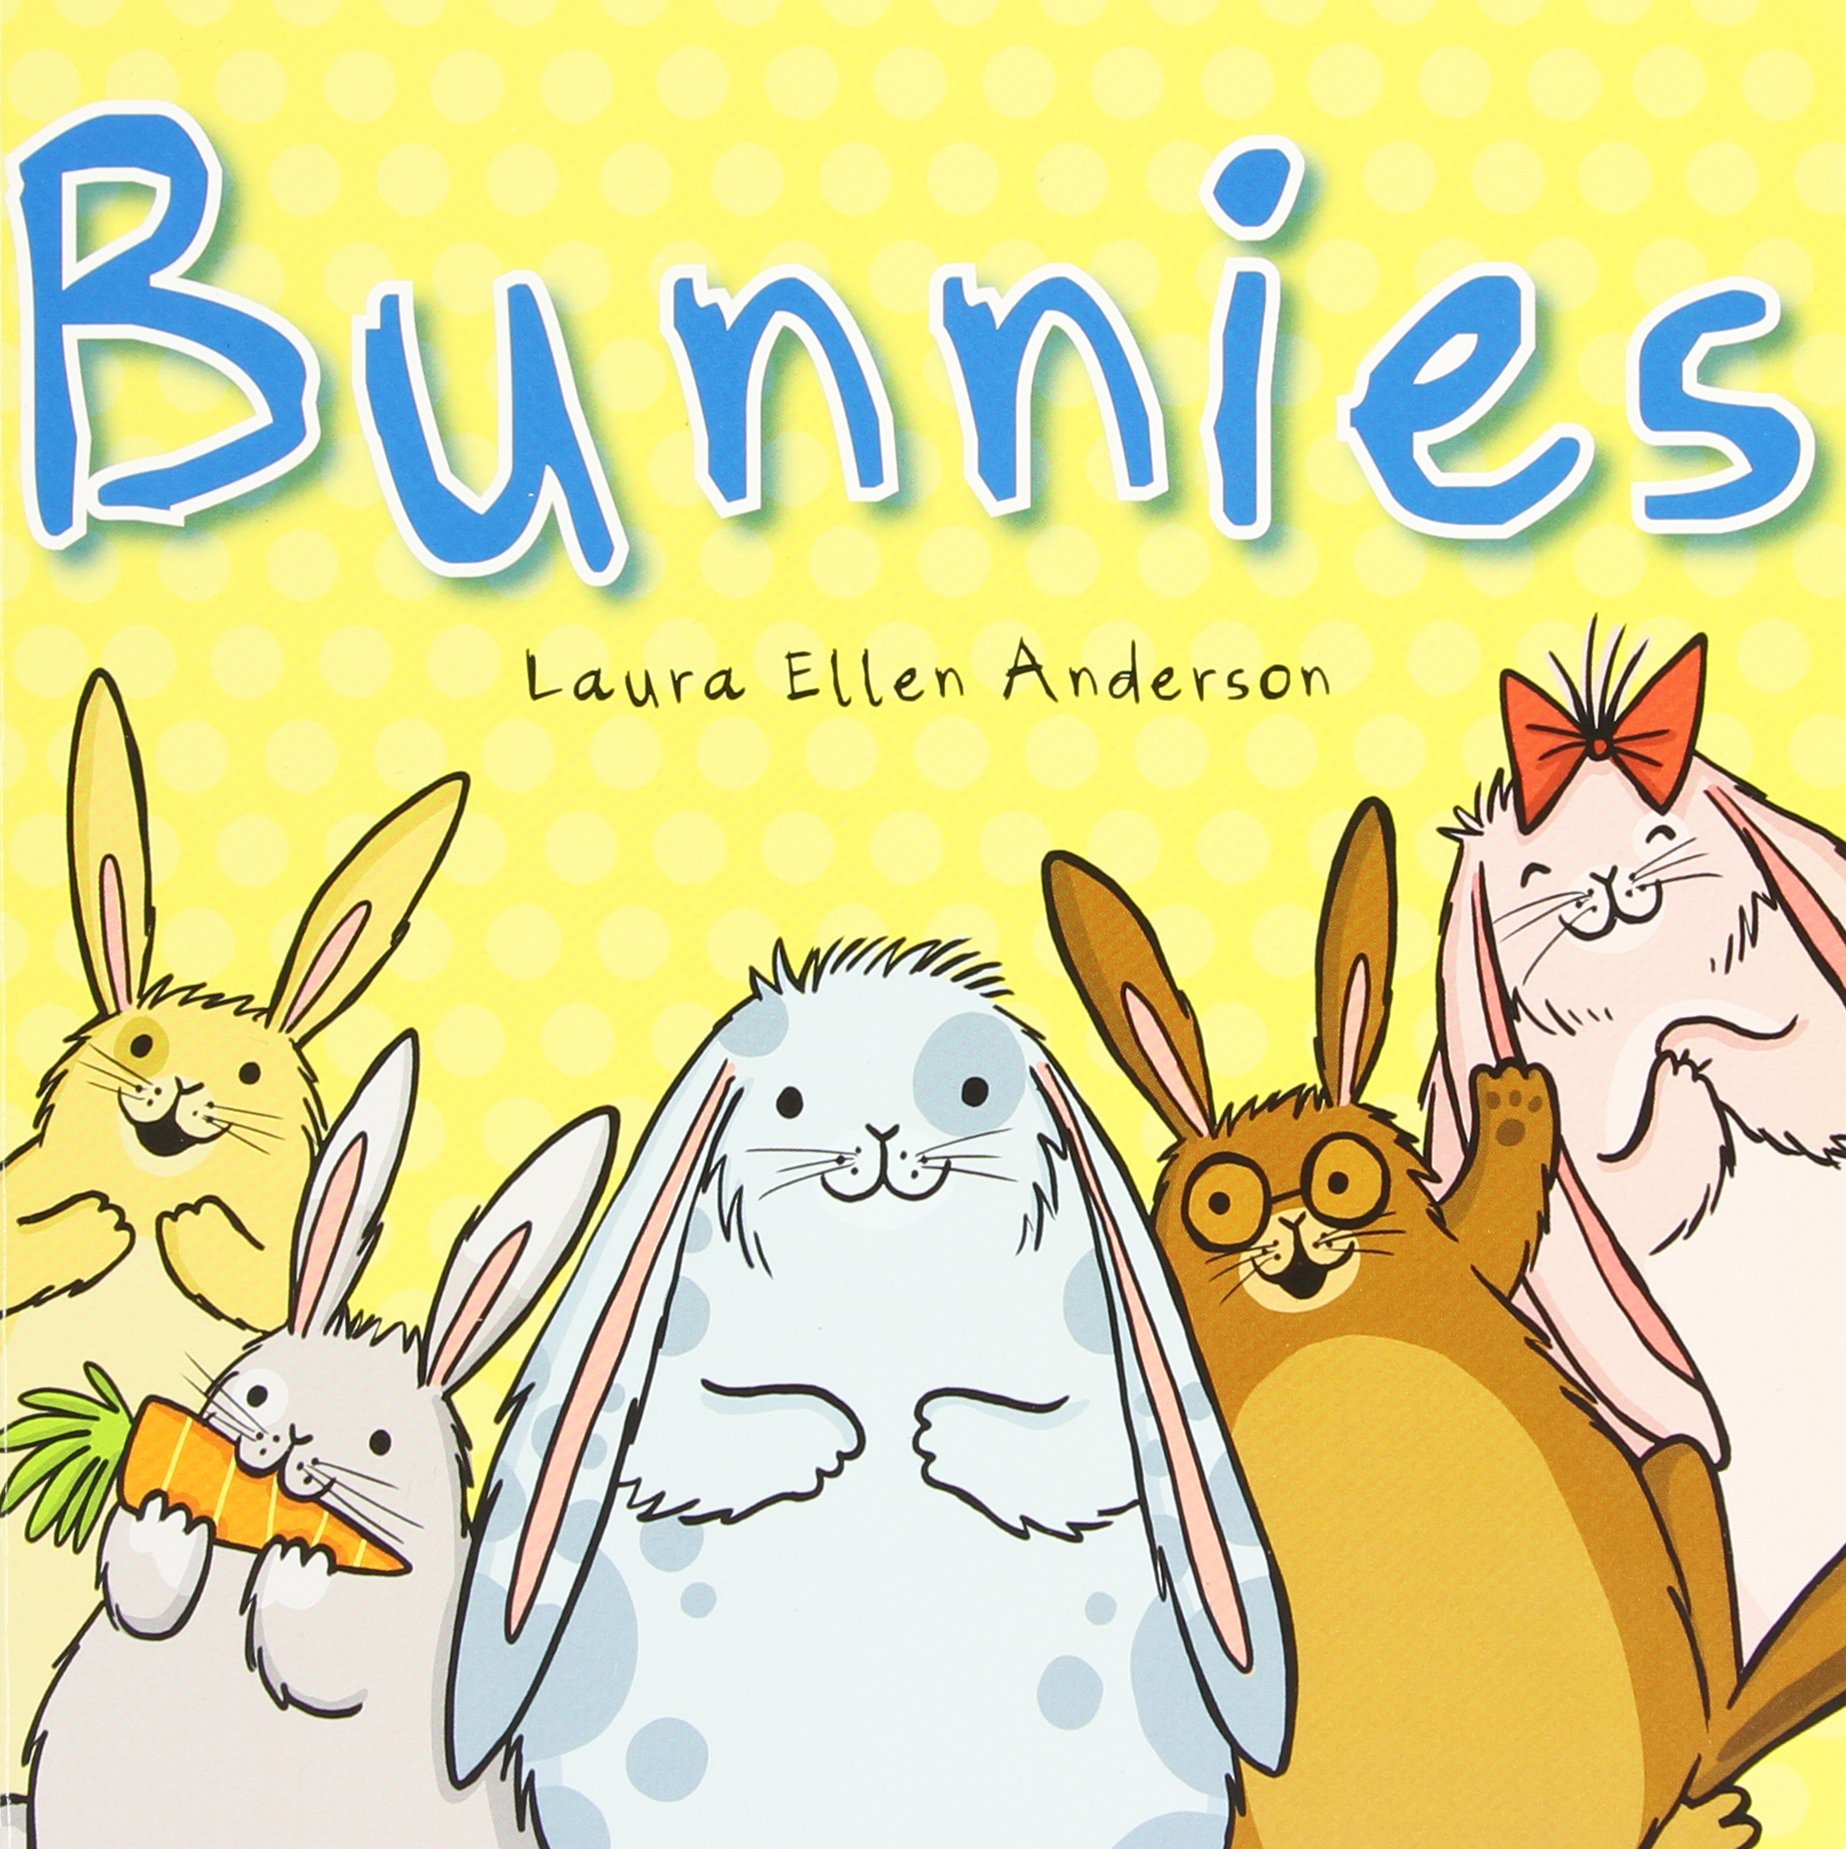 25 Easter Books For Kids | Easter books make great gifts and are perfect for Easter Baskets! 